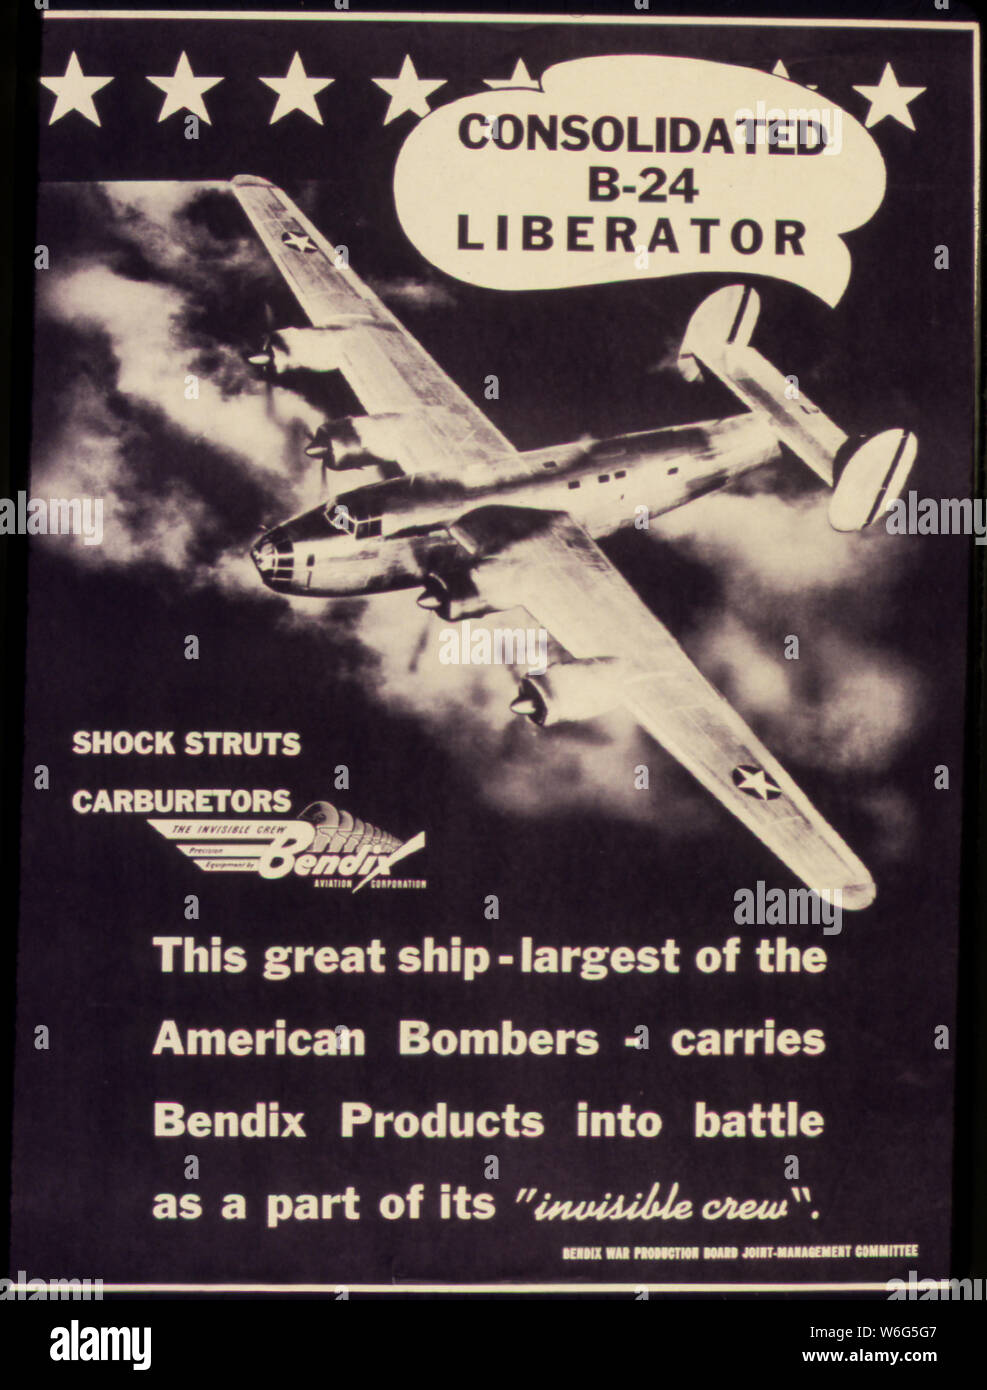 Consolidated B-24 Liberator. This great ship - largest of the American Bombers - carries Bendix Products into battle as a part of its invisible crew. Stock Photo